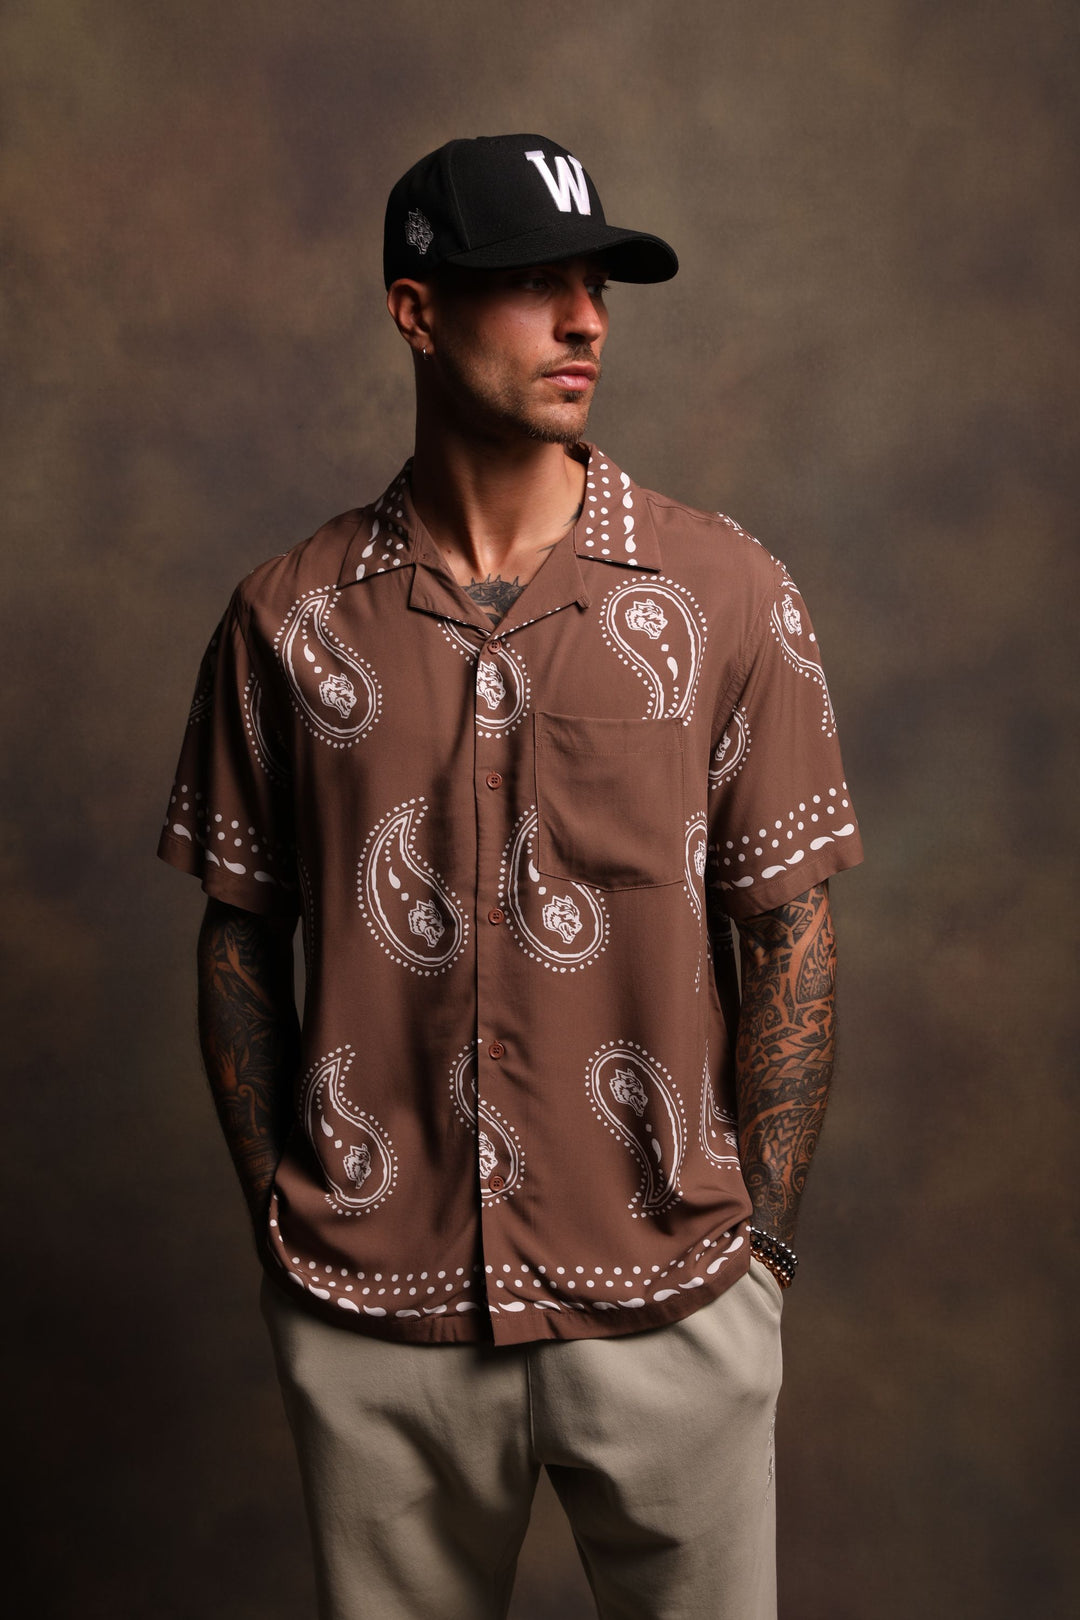 Southwest Paisley Ace Button Up Shirt in Mojave Brown